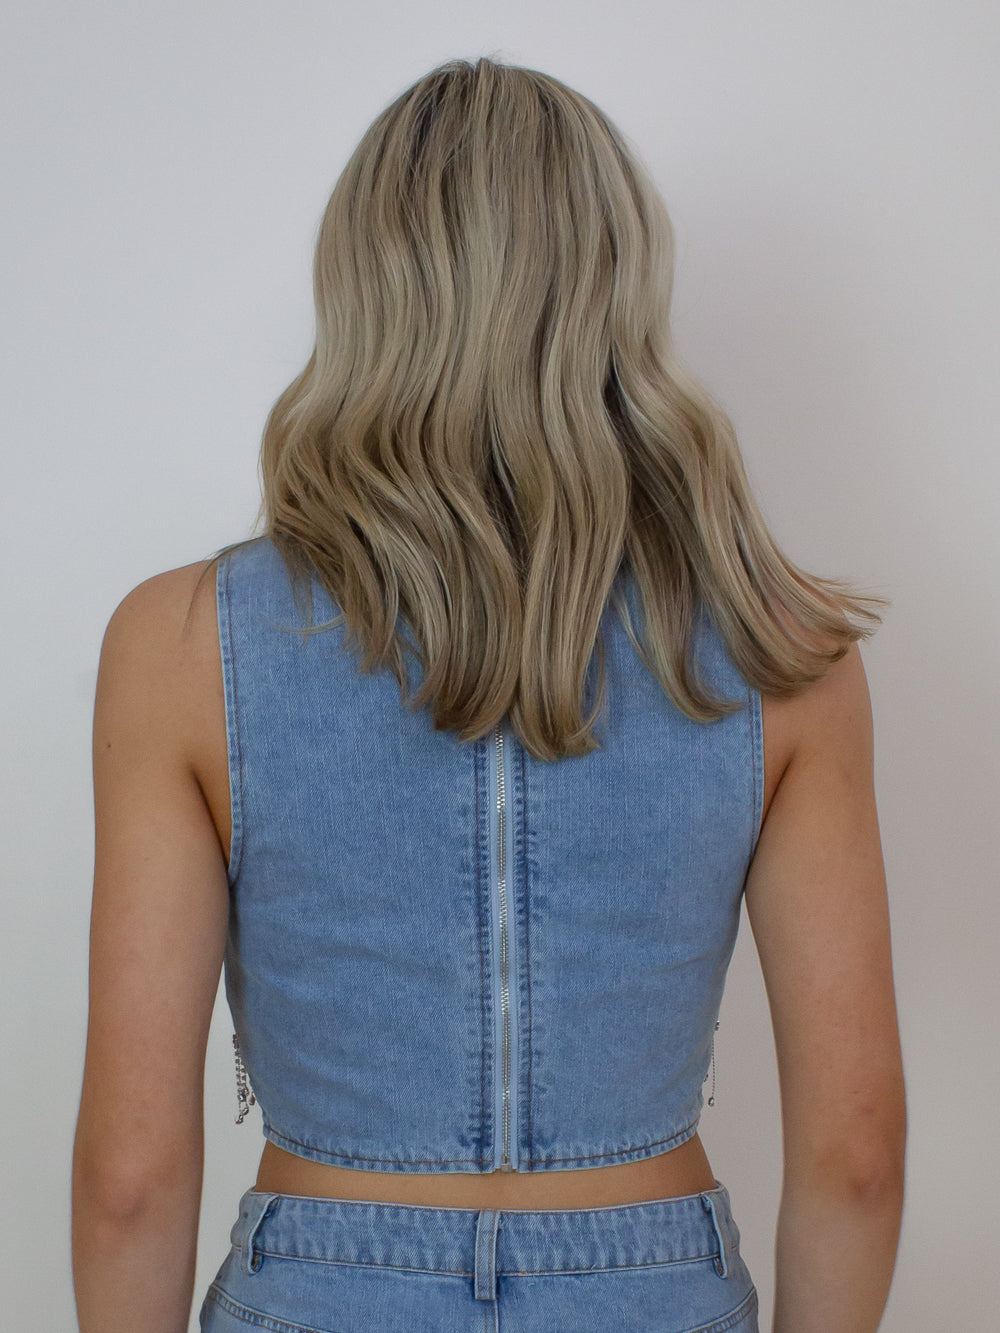 Denim vest top with zipper detail on the back 